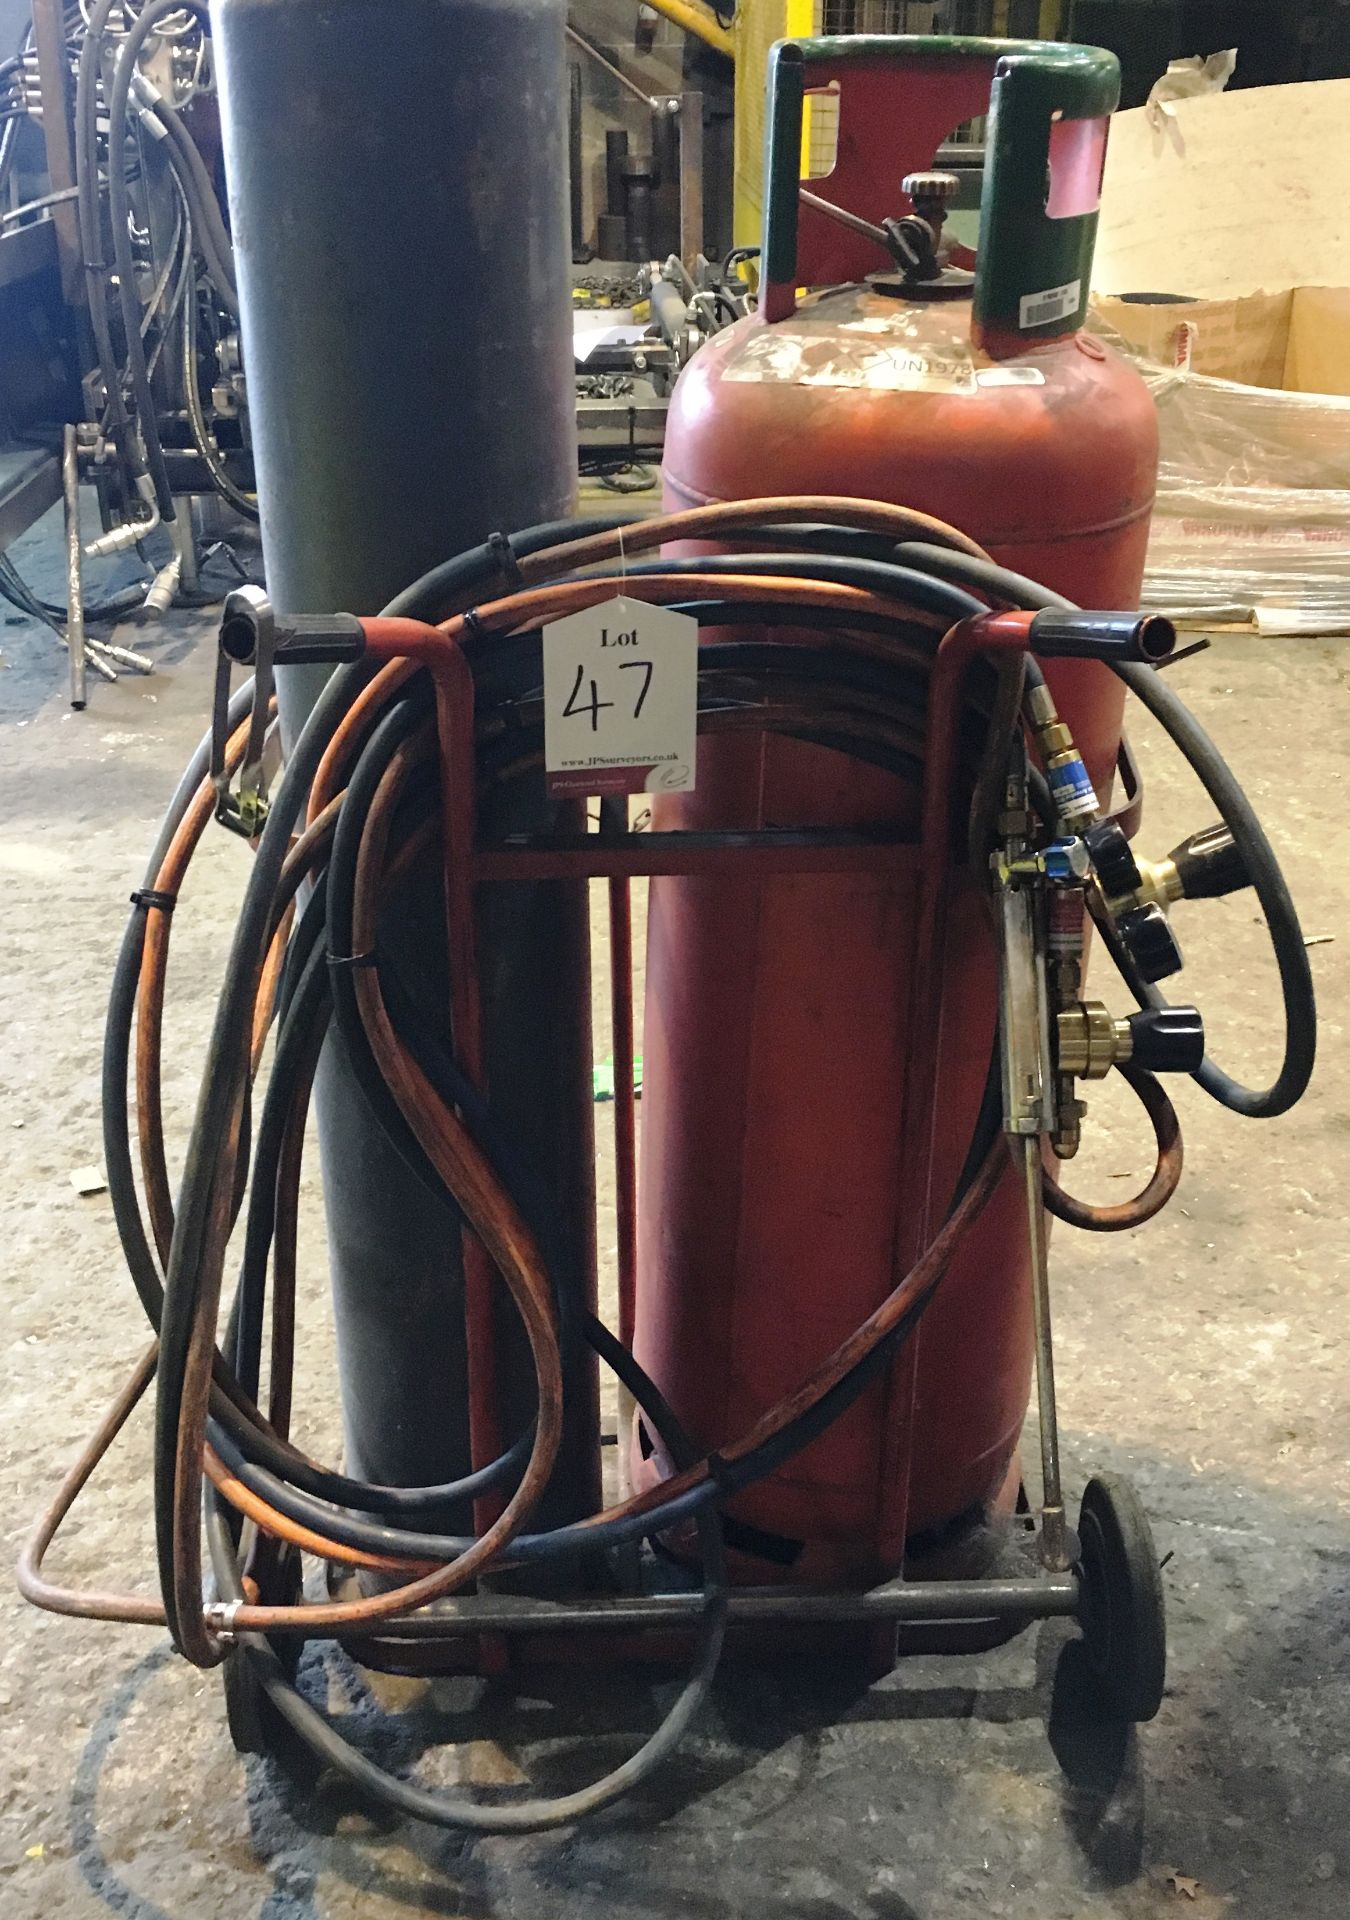 Welding Torch with Double Gas Bottle Trolley - Gas Bottles Not Included